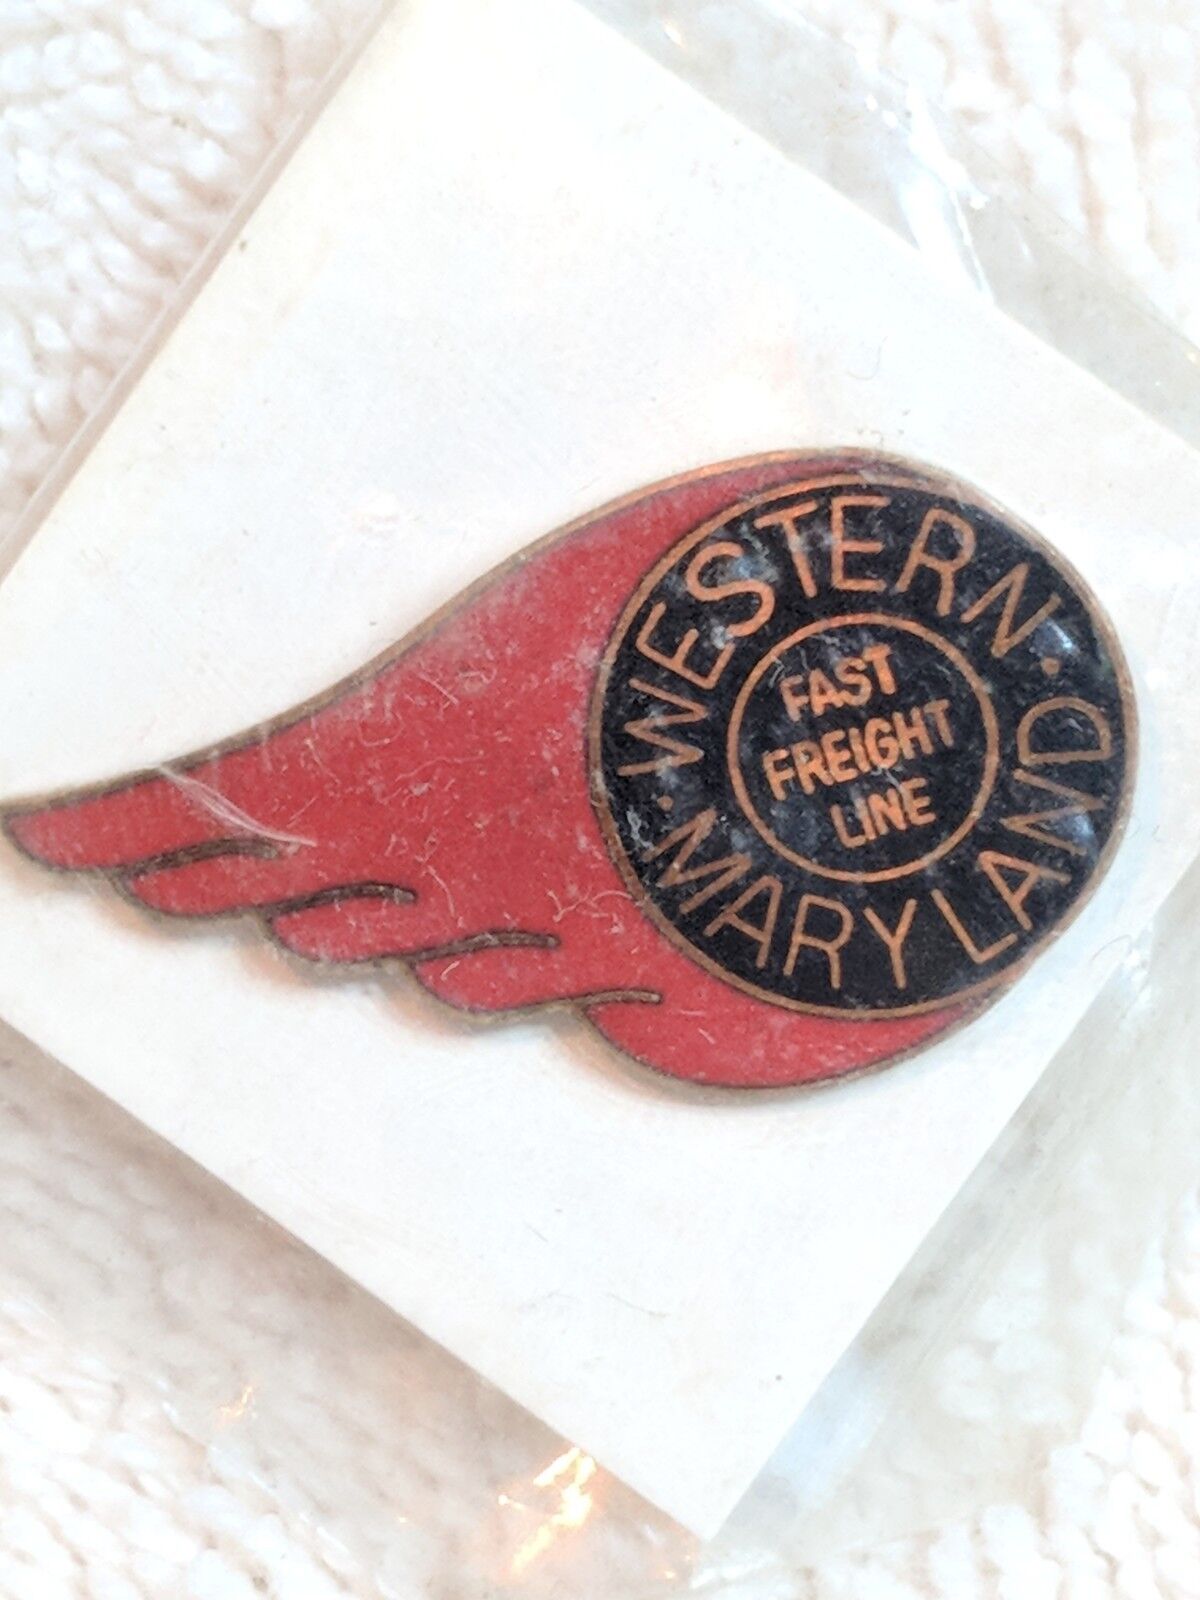 VINTAGE WESTERN MARYLAND FAST FREIGHT LINE TIE TACK LAPEL PIN